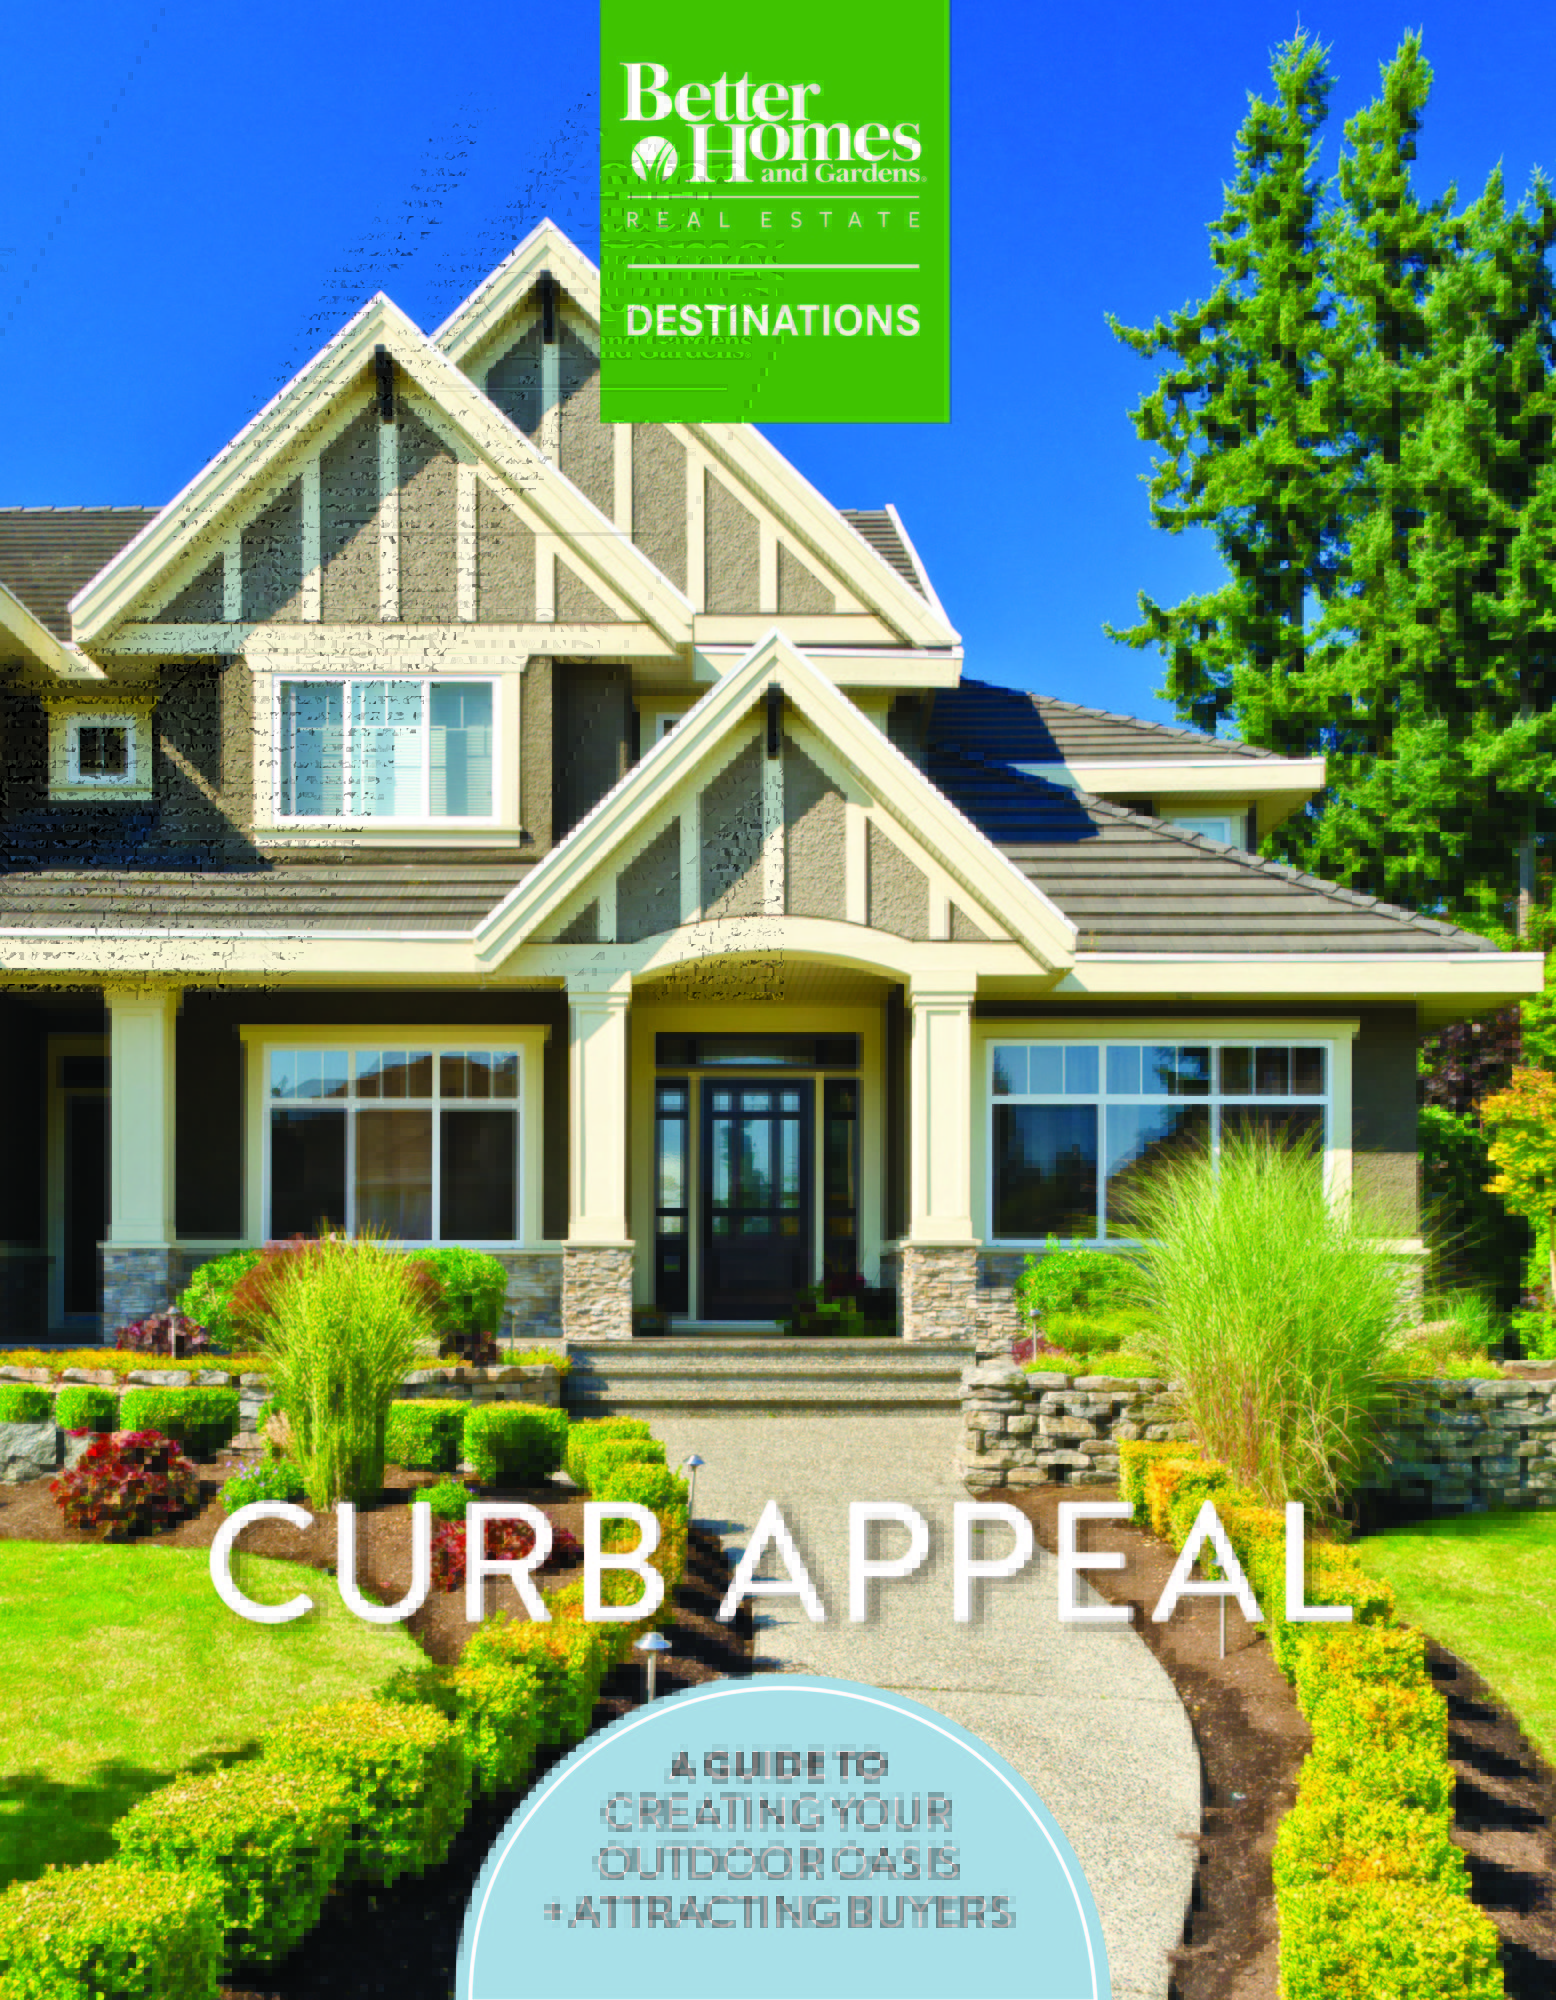 Curb appeal magazine cover by BHGRE trees and a house